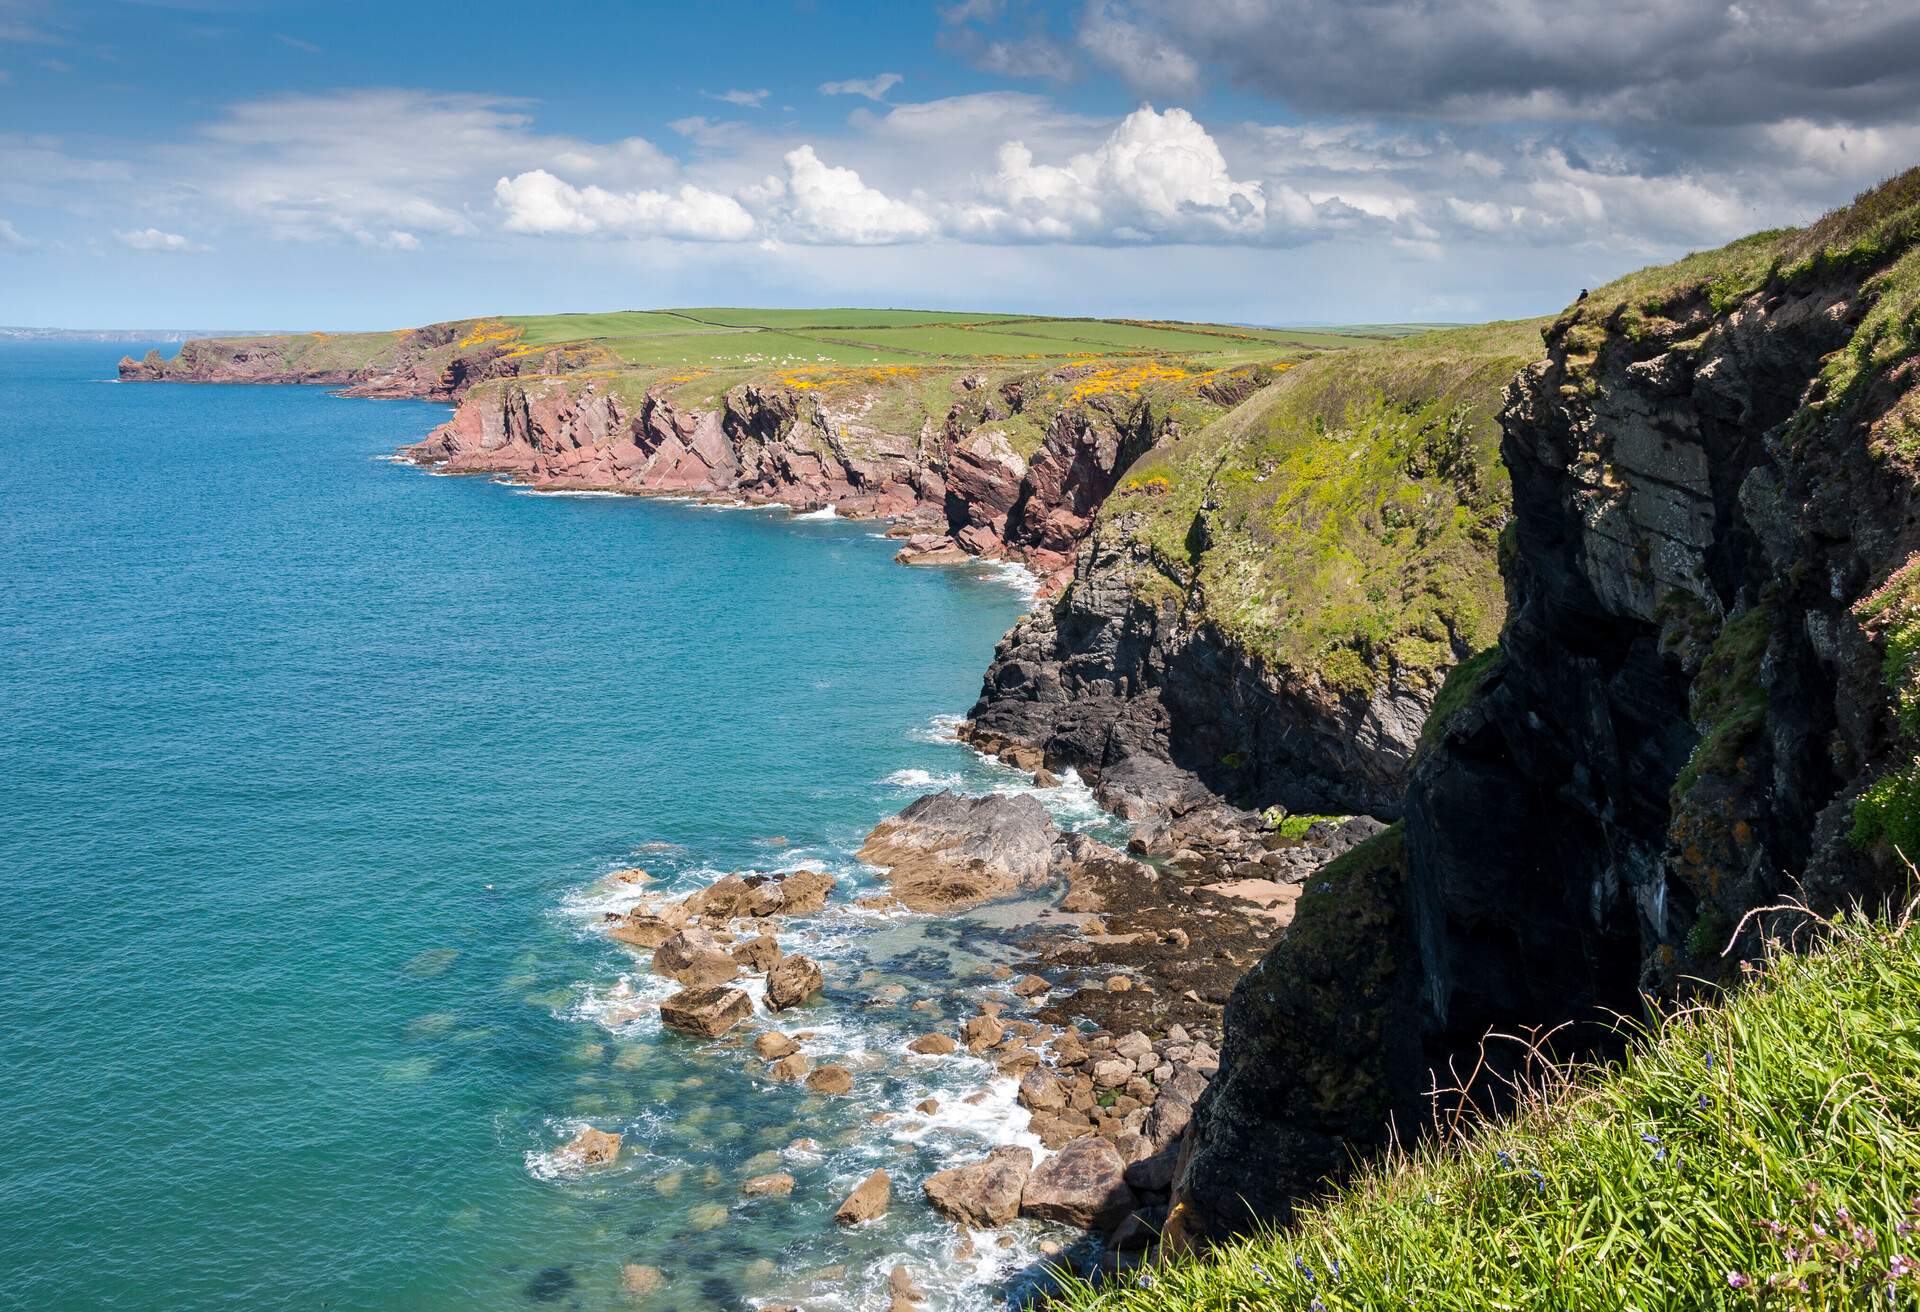 A picturesque coast with crystal-clear blue waters alongside red sandstone cliffs covered with grass and wildflowers on its edge.